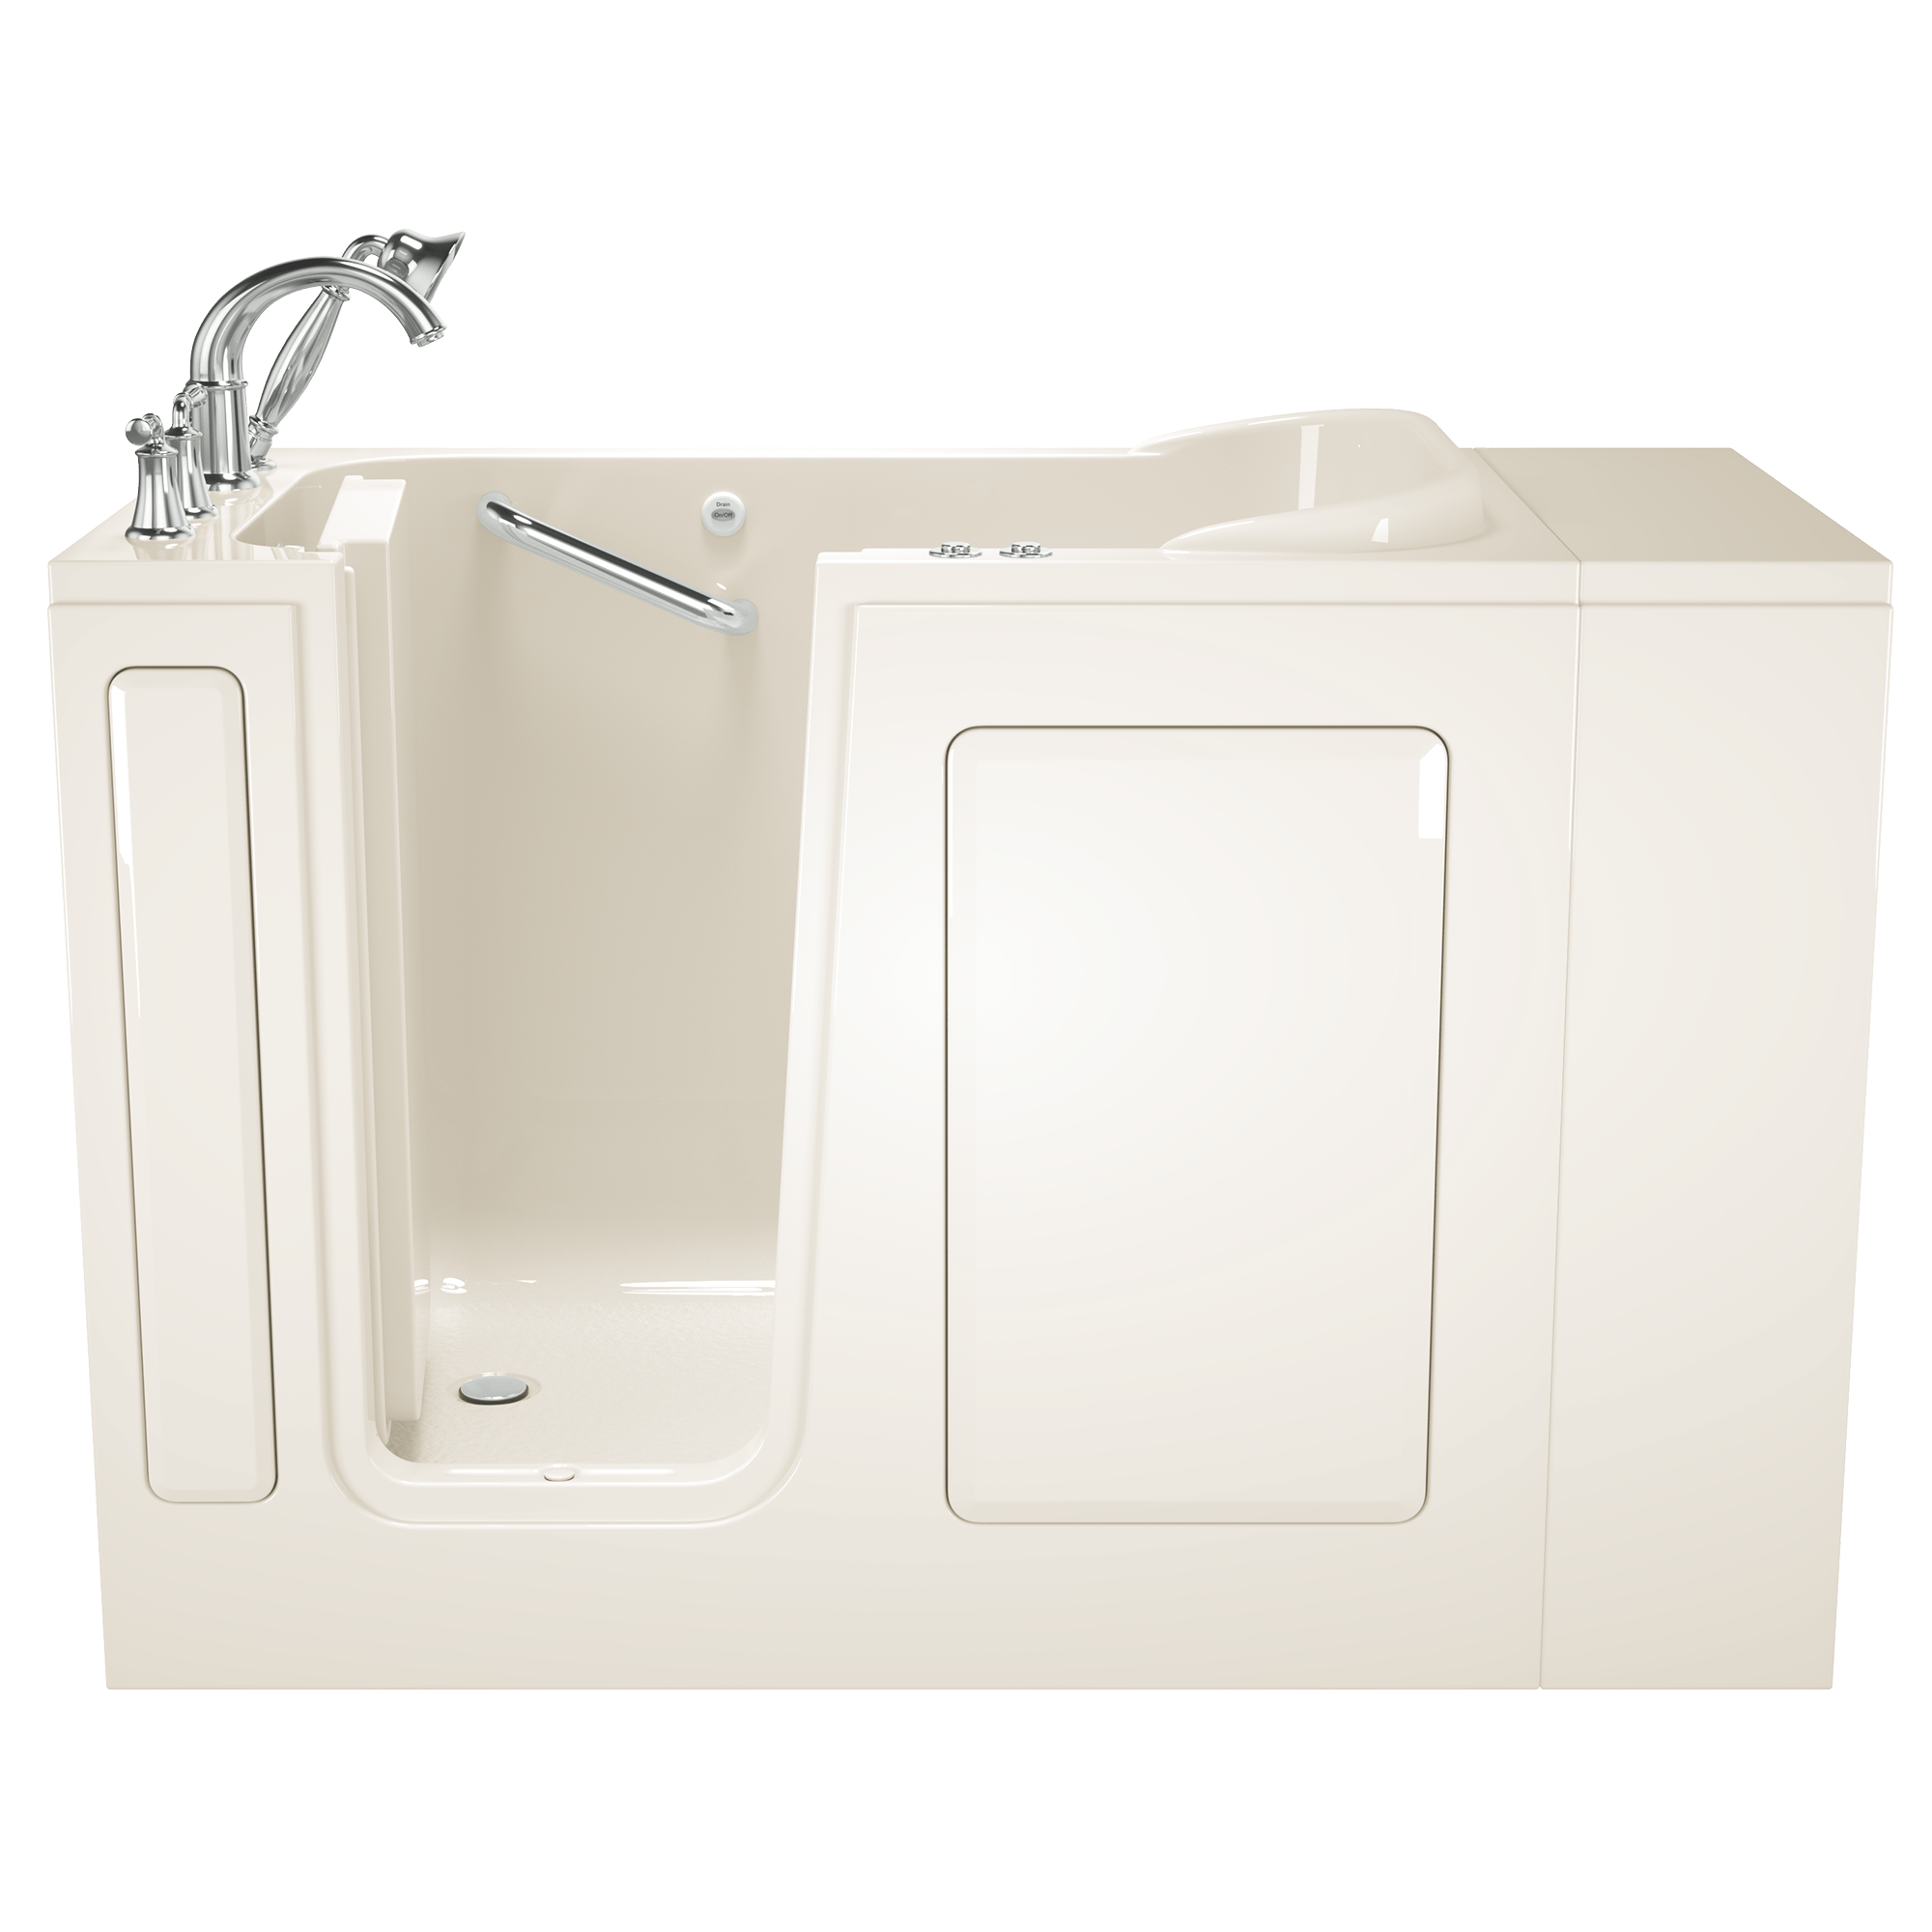 Gelcoat Value Series 28x48-Inch Walk-in Bathtub with Combination Air Spa and Whirlpool Systems  Left Hand Door and Drain